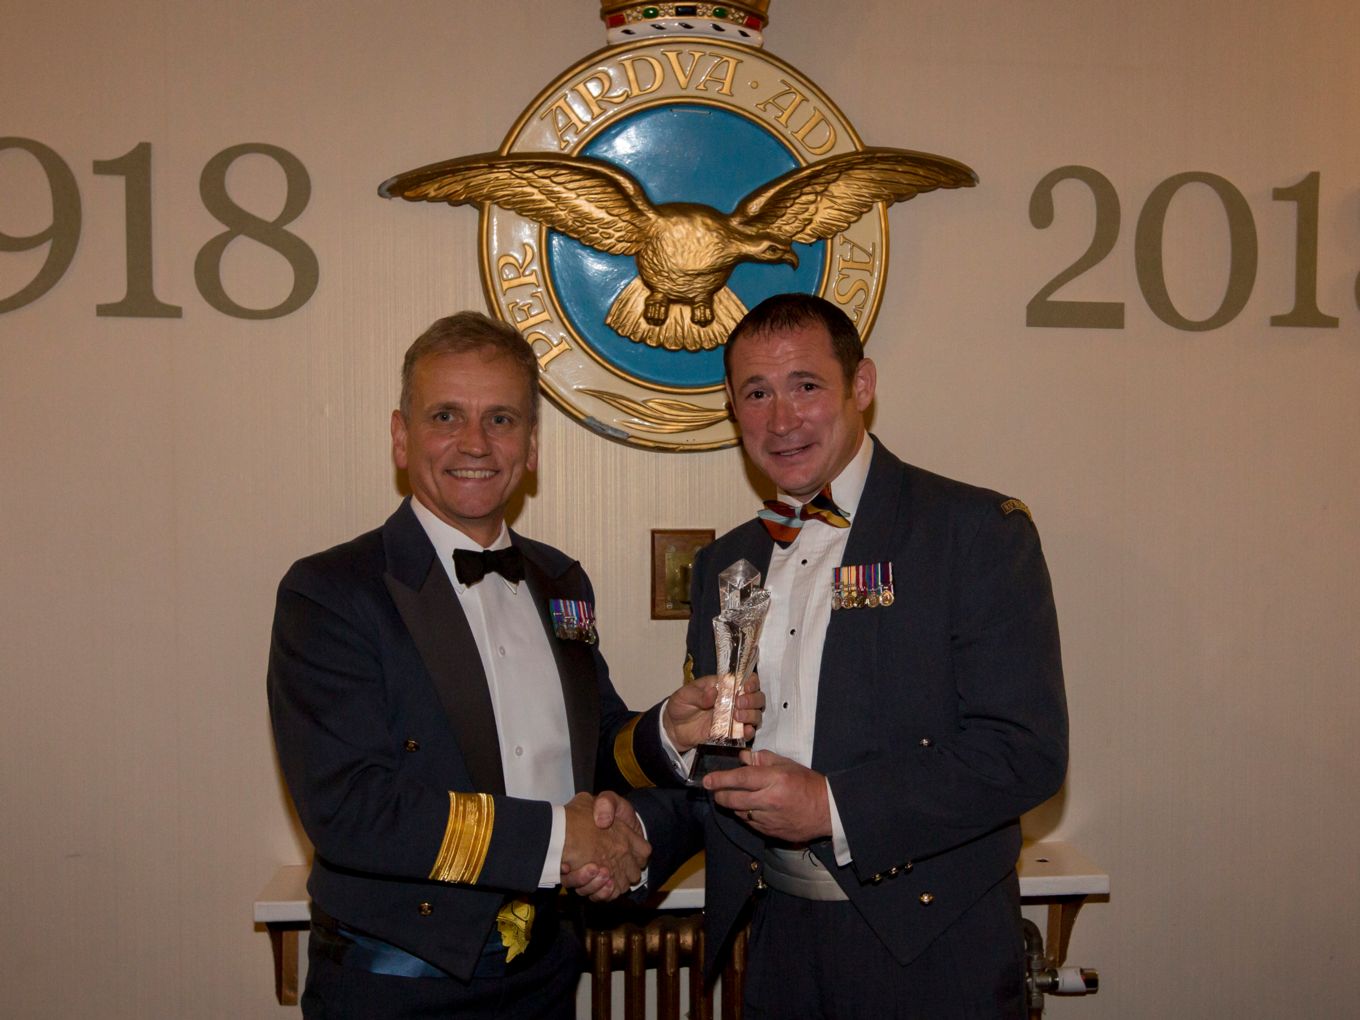 Sgt Darren Pipe receives his award from Air Cdre Mark Gilligan